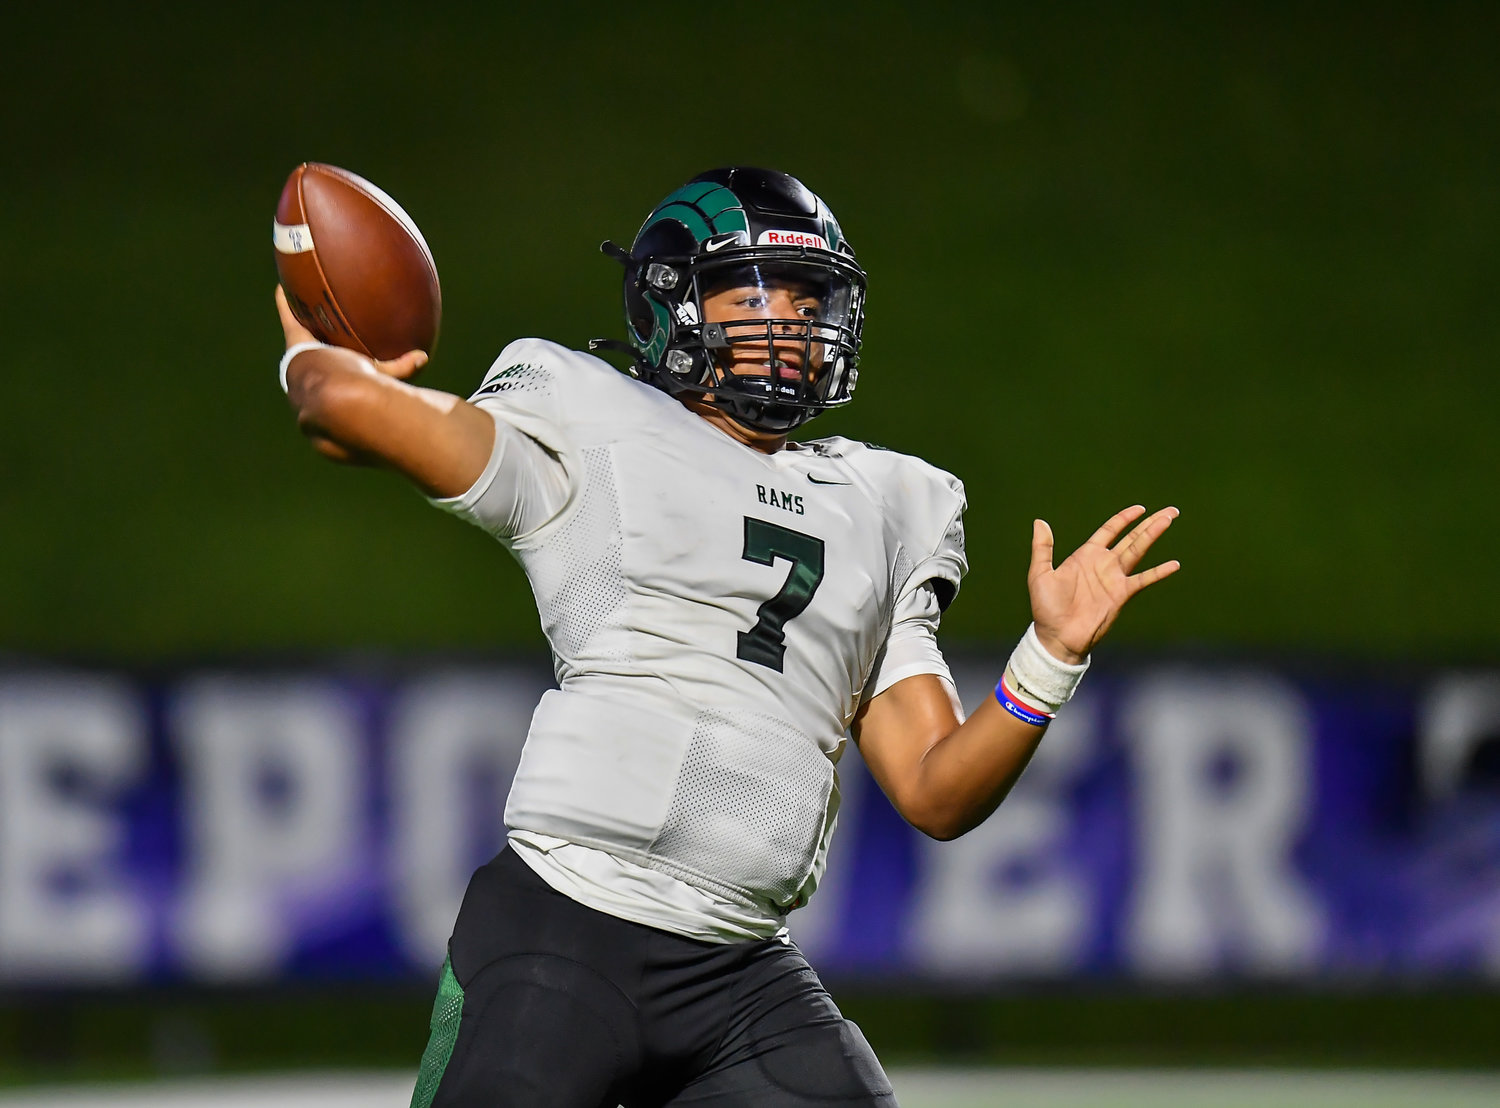 Katy, Tx. Oct. 15, 2021: Mayde Creeks Jaylen Bragg #7 delivers a pass during a conference game between Mayde Creek and Katy Taylor at Rhodes Stadium. (Photo by Mark Goodman / Katy Times)